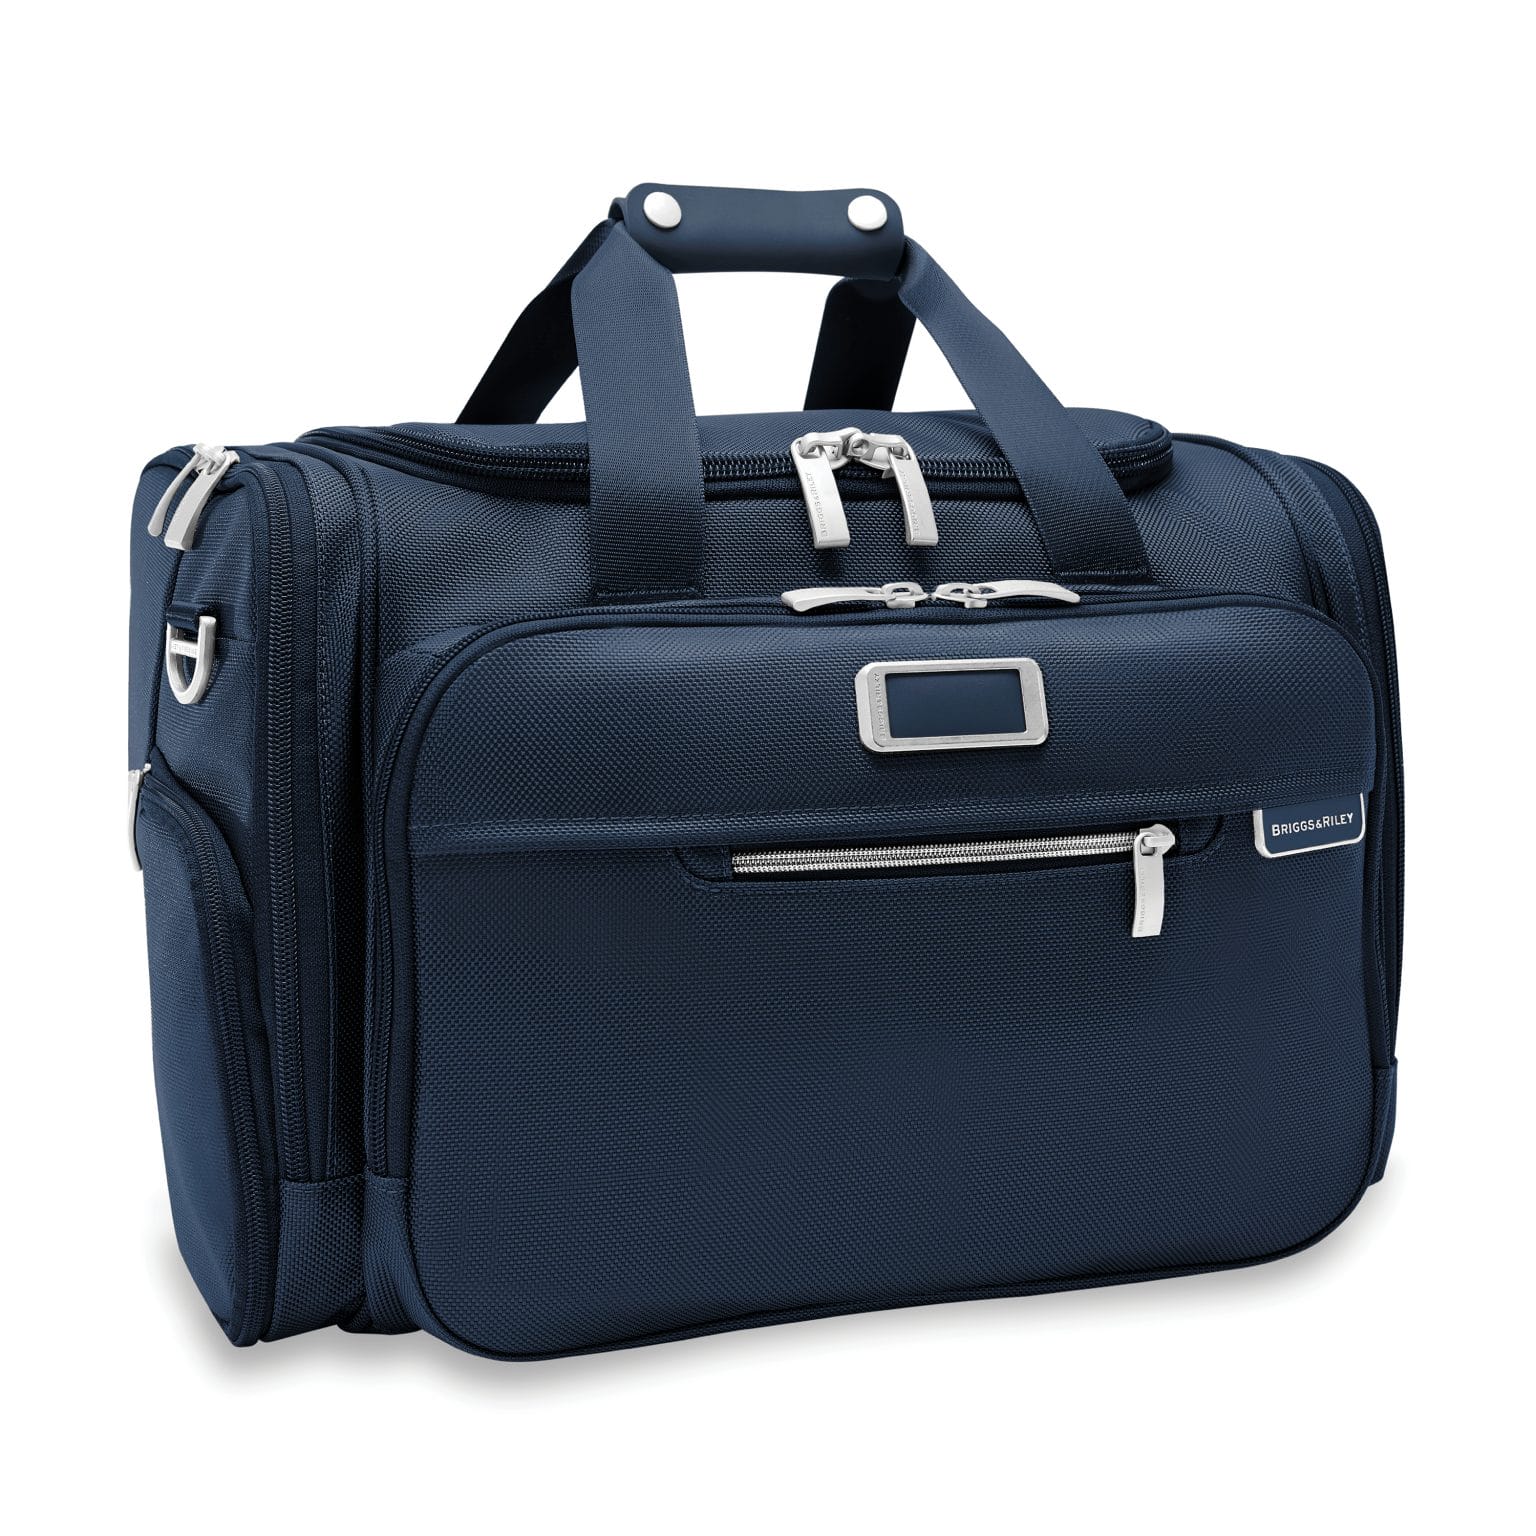 Briggs & Riley Baseline Underseat Duffle - 3 Colors - Irv’s Luggage